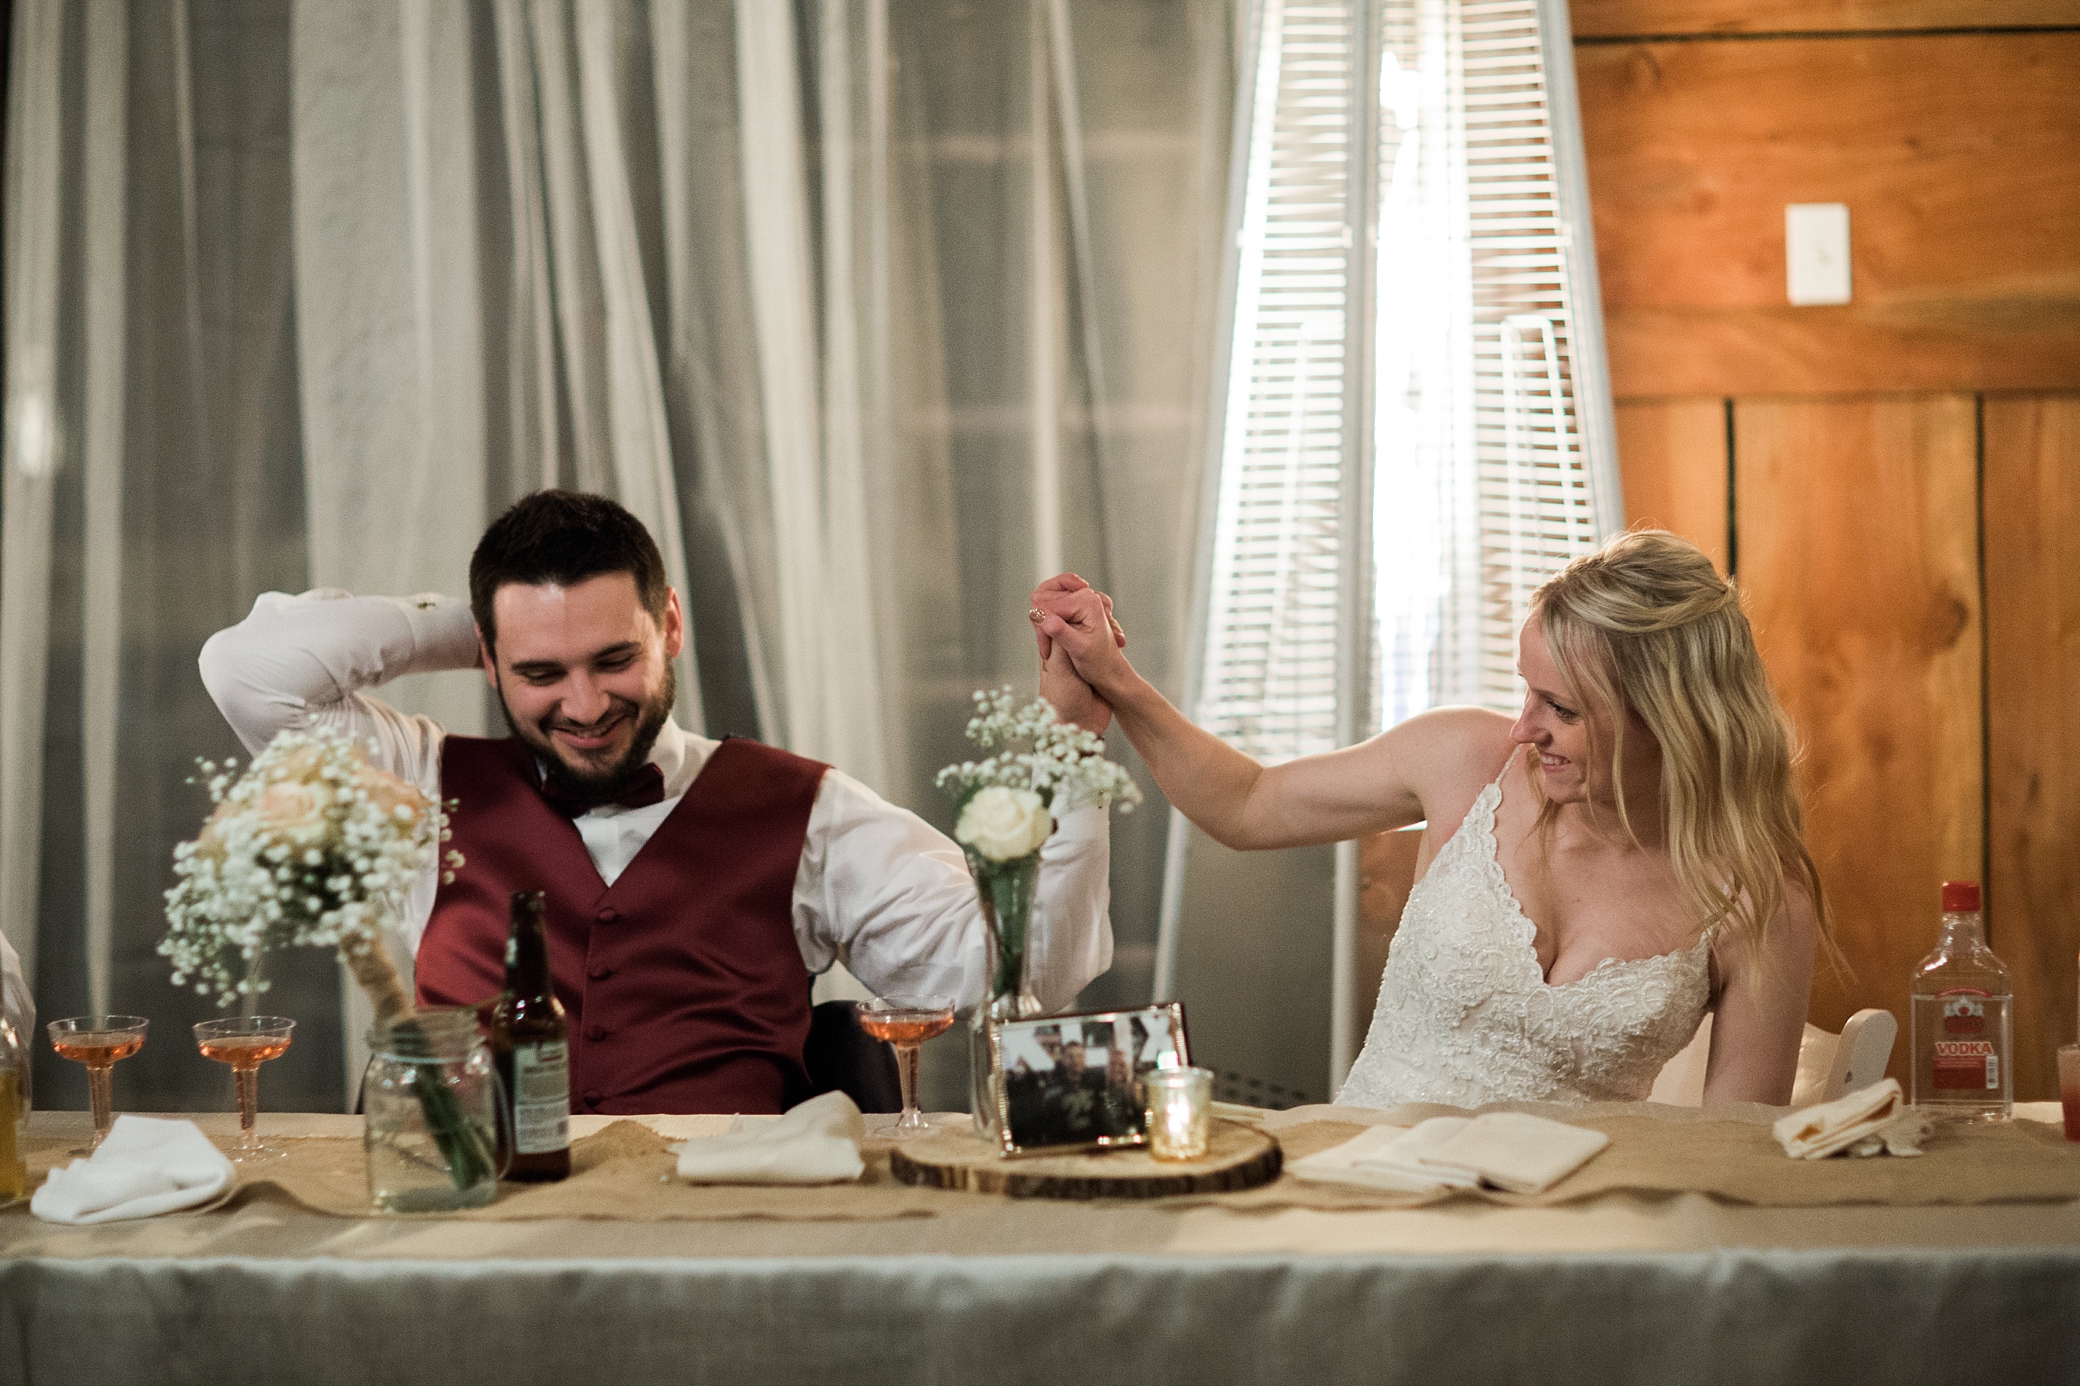 Bride and Groom at Reception | Megan Montalvo Photography 